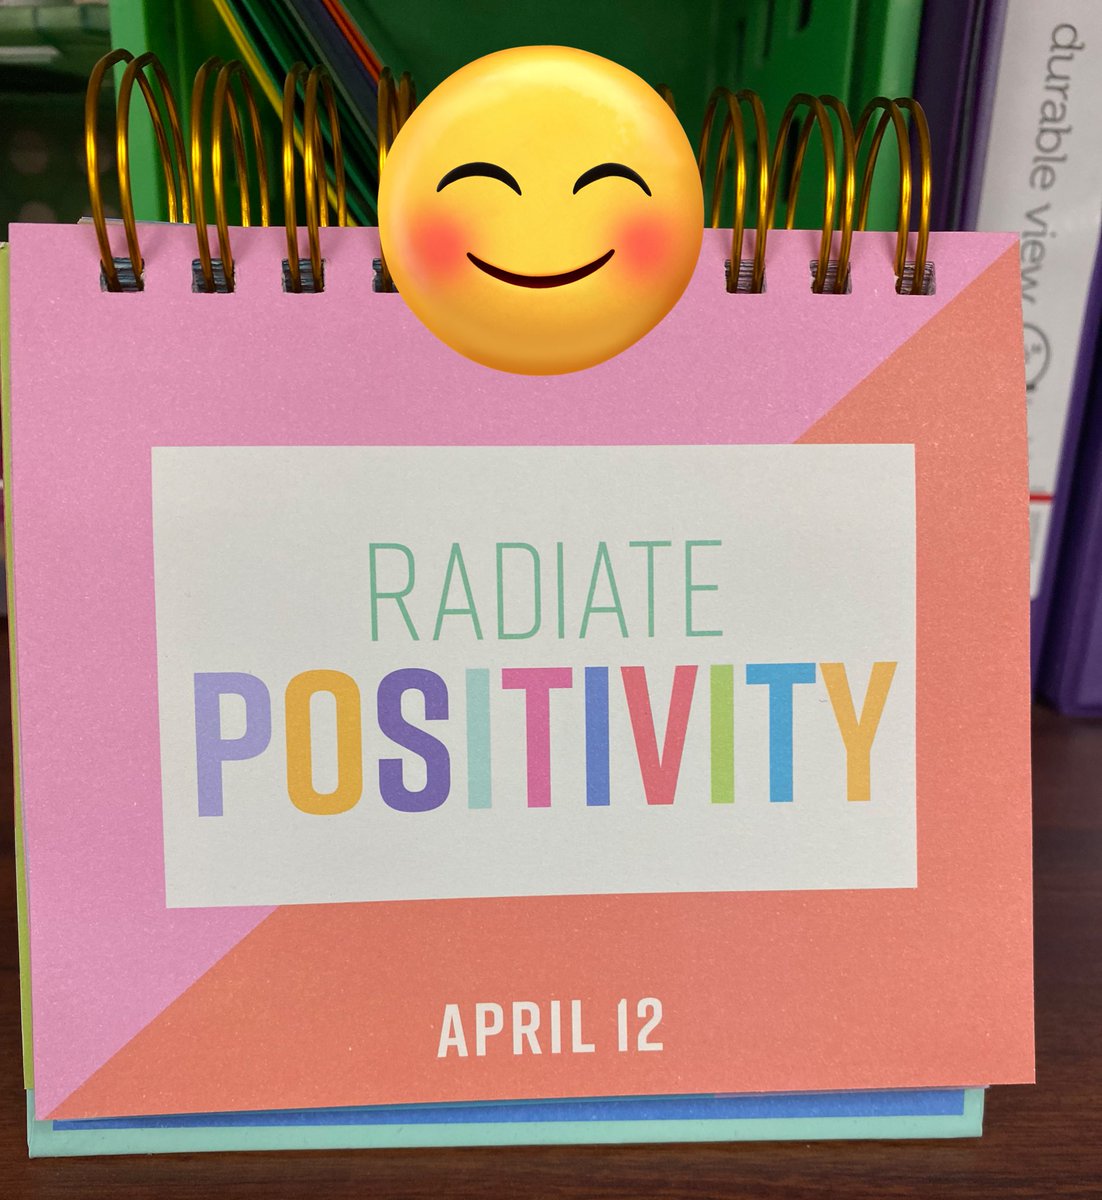 With the #FinalExam week📝 getting closer, #OLAB’s #FriendlyFriday message💬 is for all students to #FinishStrong and #RadiatePositivity! 💻✅Let’s do this! 👍🏼 Congratulations to Arch, Demarcus, and Abigail! 🥳👏🏼🎊 @RGAPMobileLive @ImagineLearning #ImagineEdgenuity